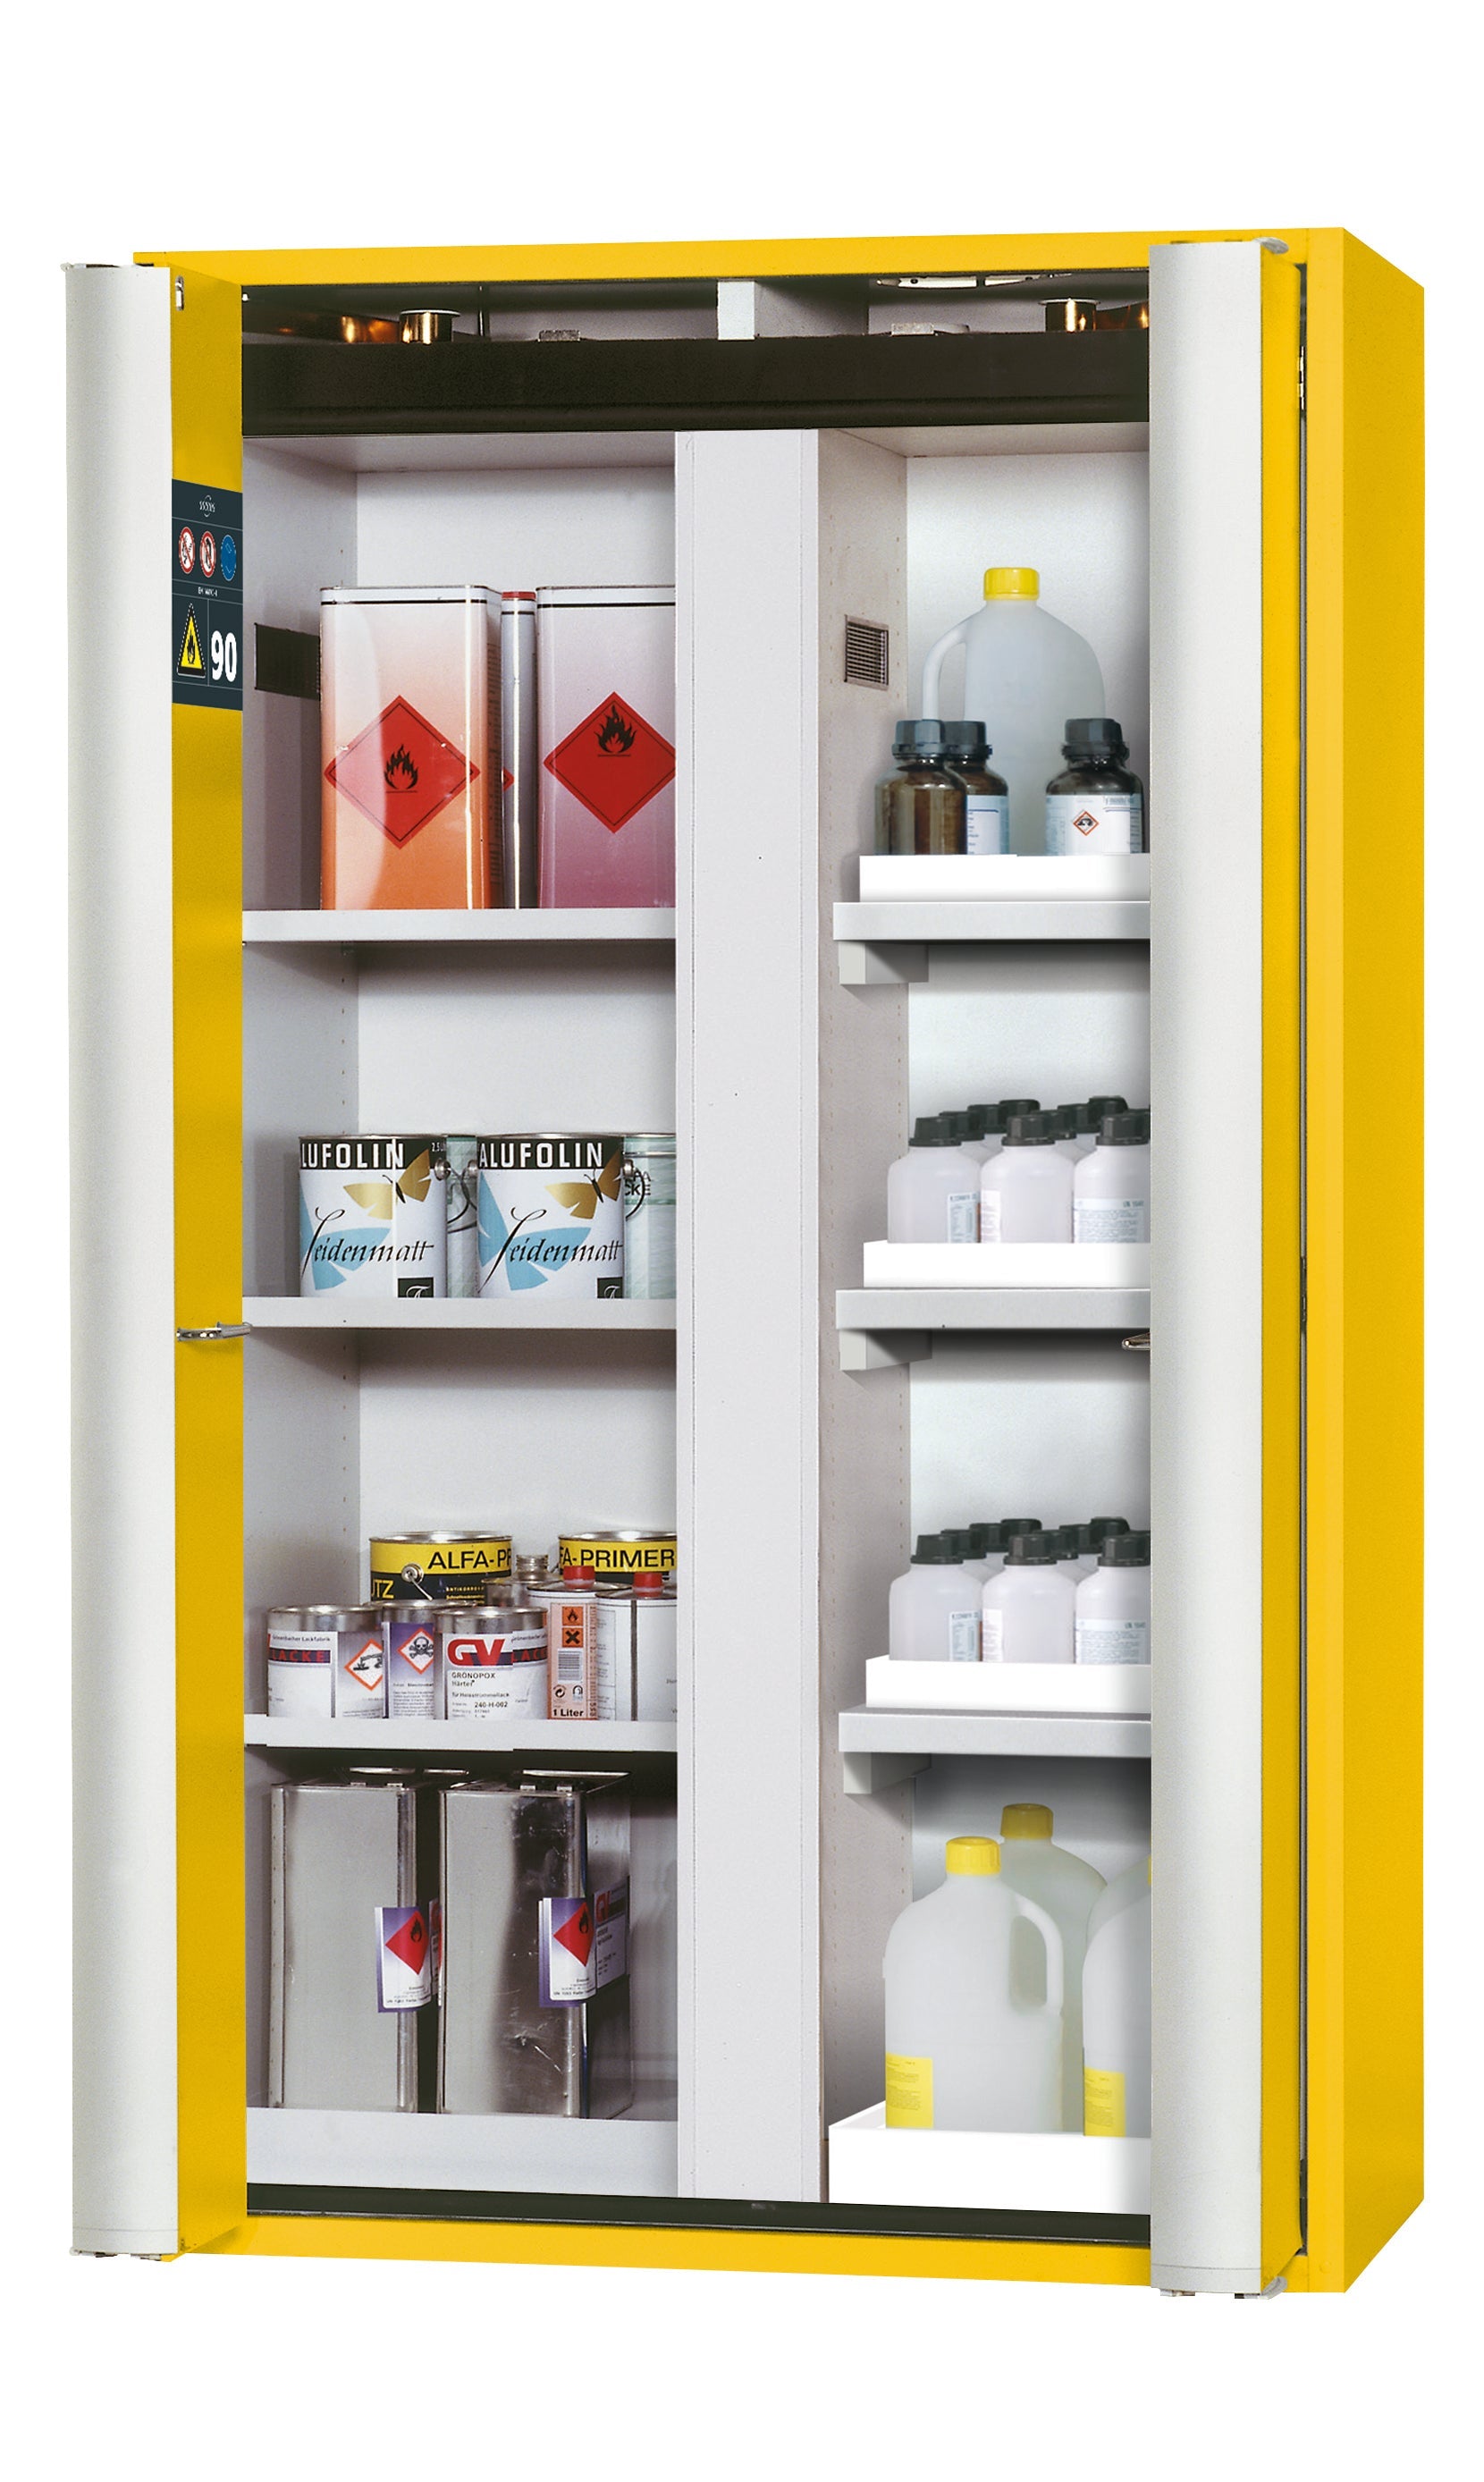 Type 90 safety cabinet S-PHOENIX-90 model S90.196.120.MV.FDAS in safety yellow RAL 1004 with 3x standard shelves (sheet steel)